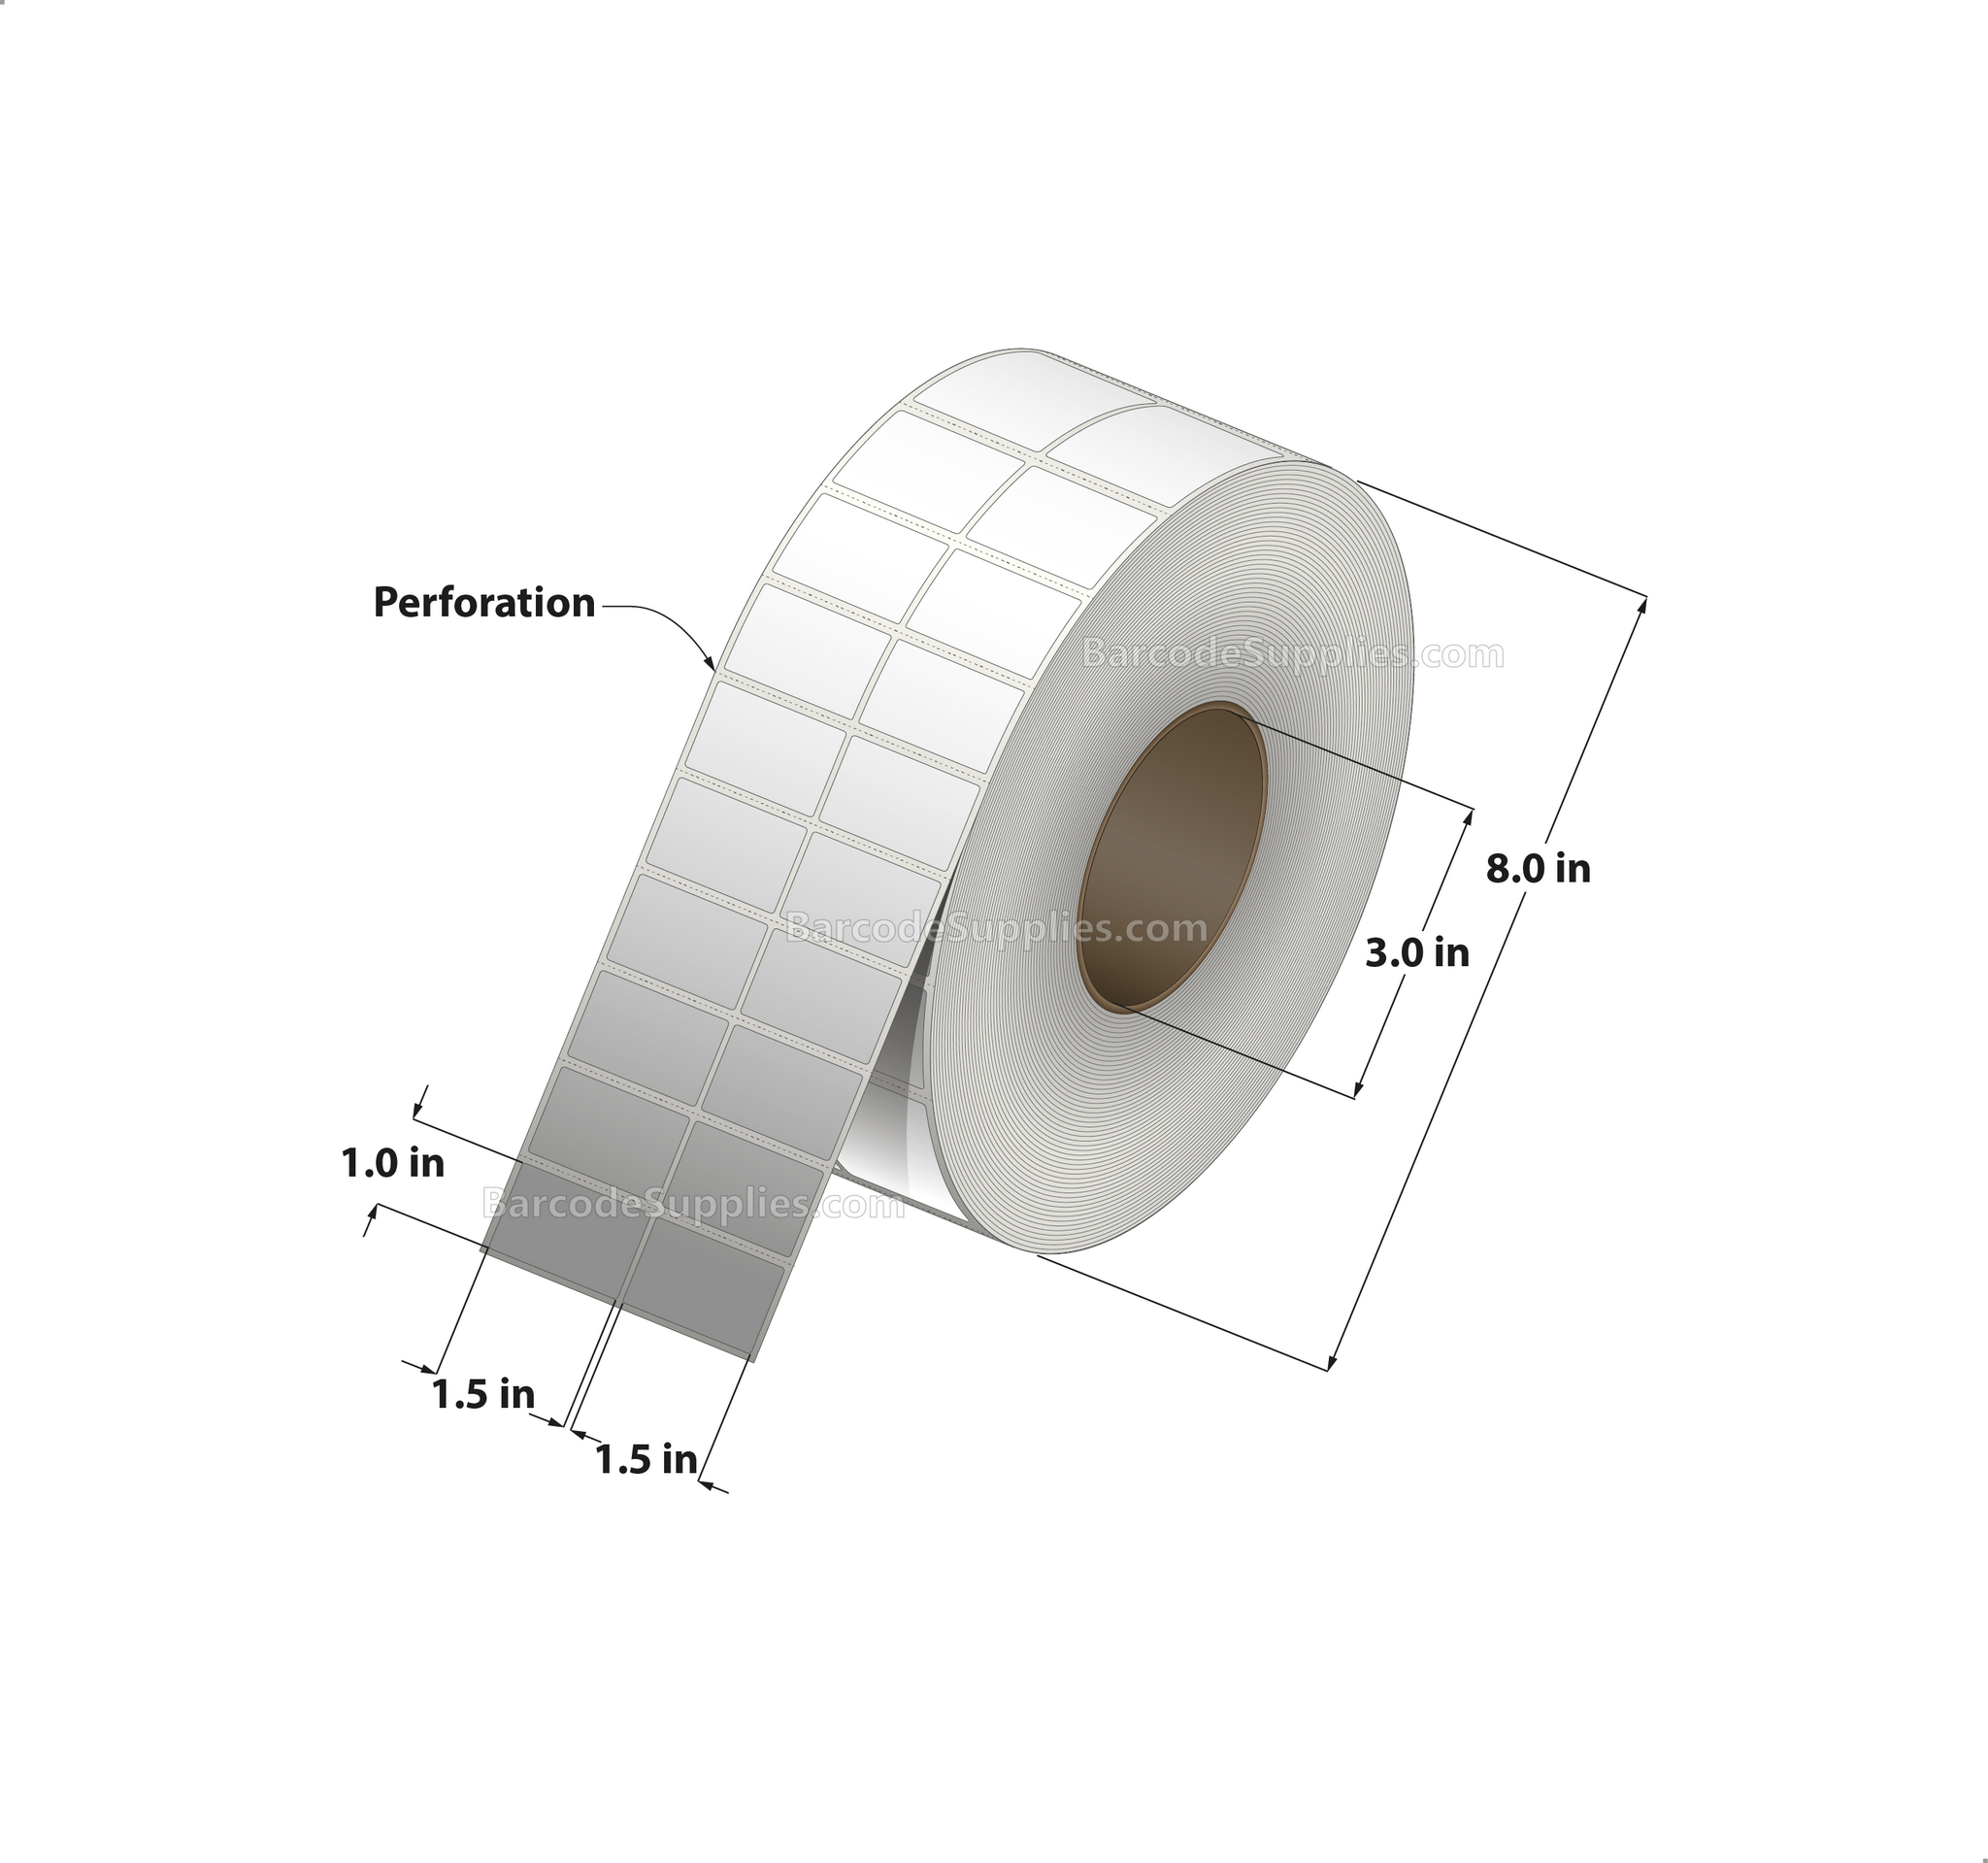 1.5 x 1 Thermal Transfer White Labels With Permanent Adhesive - Perforated - 10,000 Labels Per Roll - Carton Of 4 Rolls - 40000 Labels Total - MPN: RT-15-1-10000-3